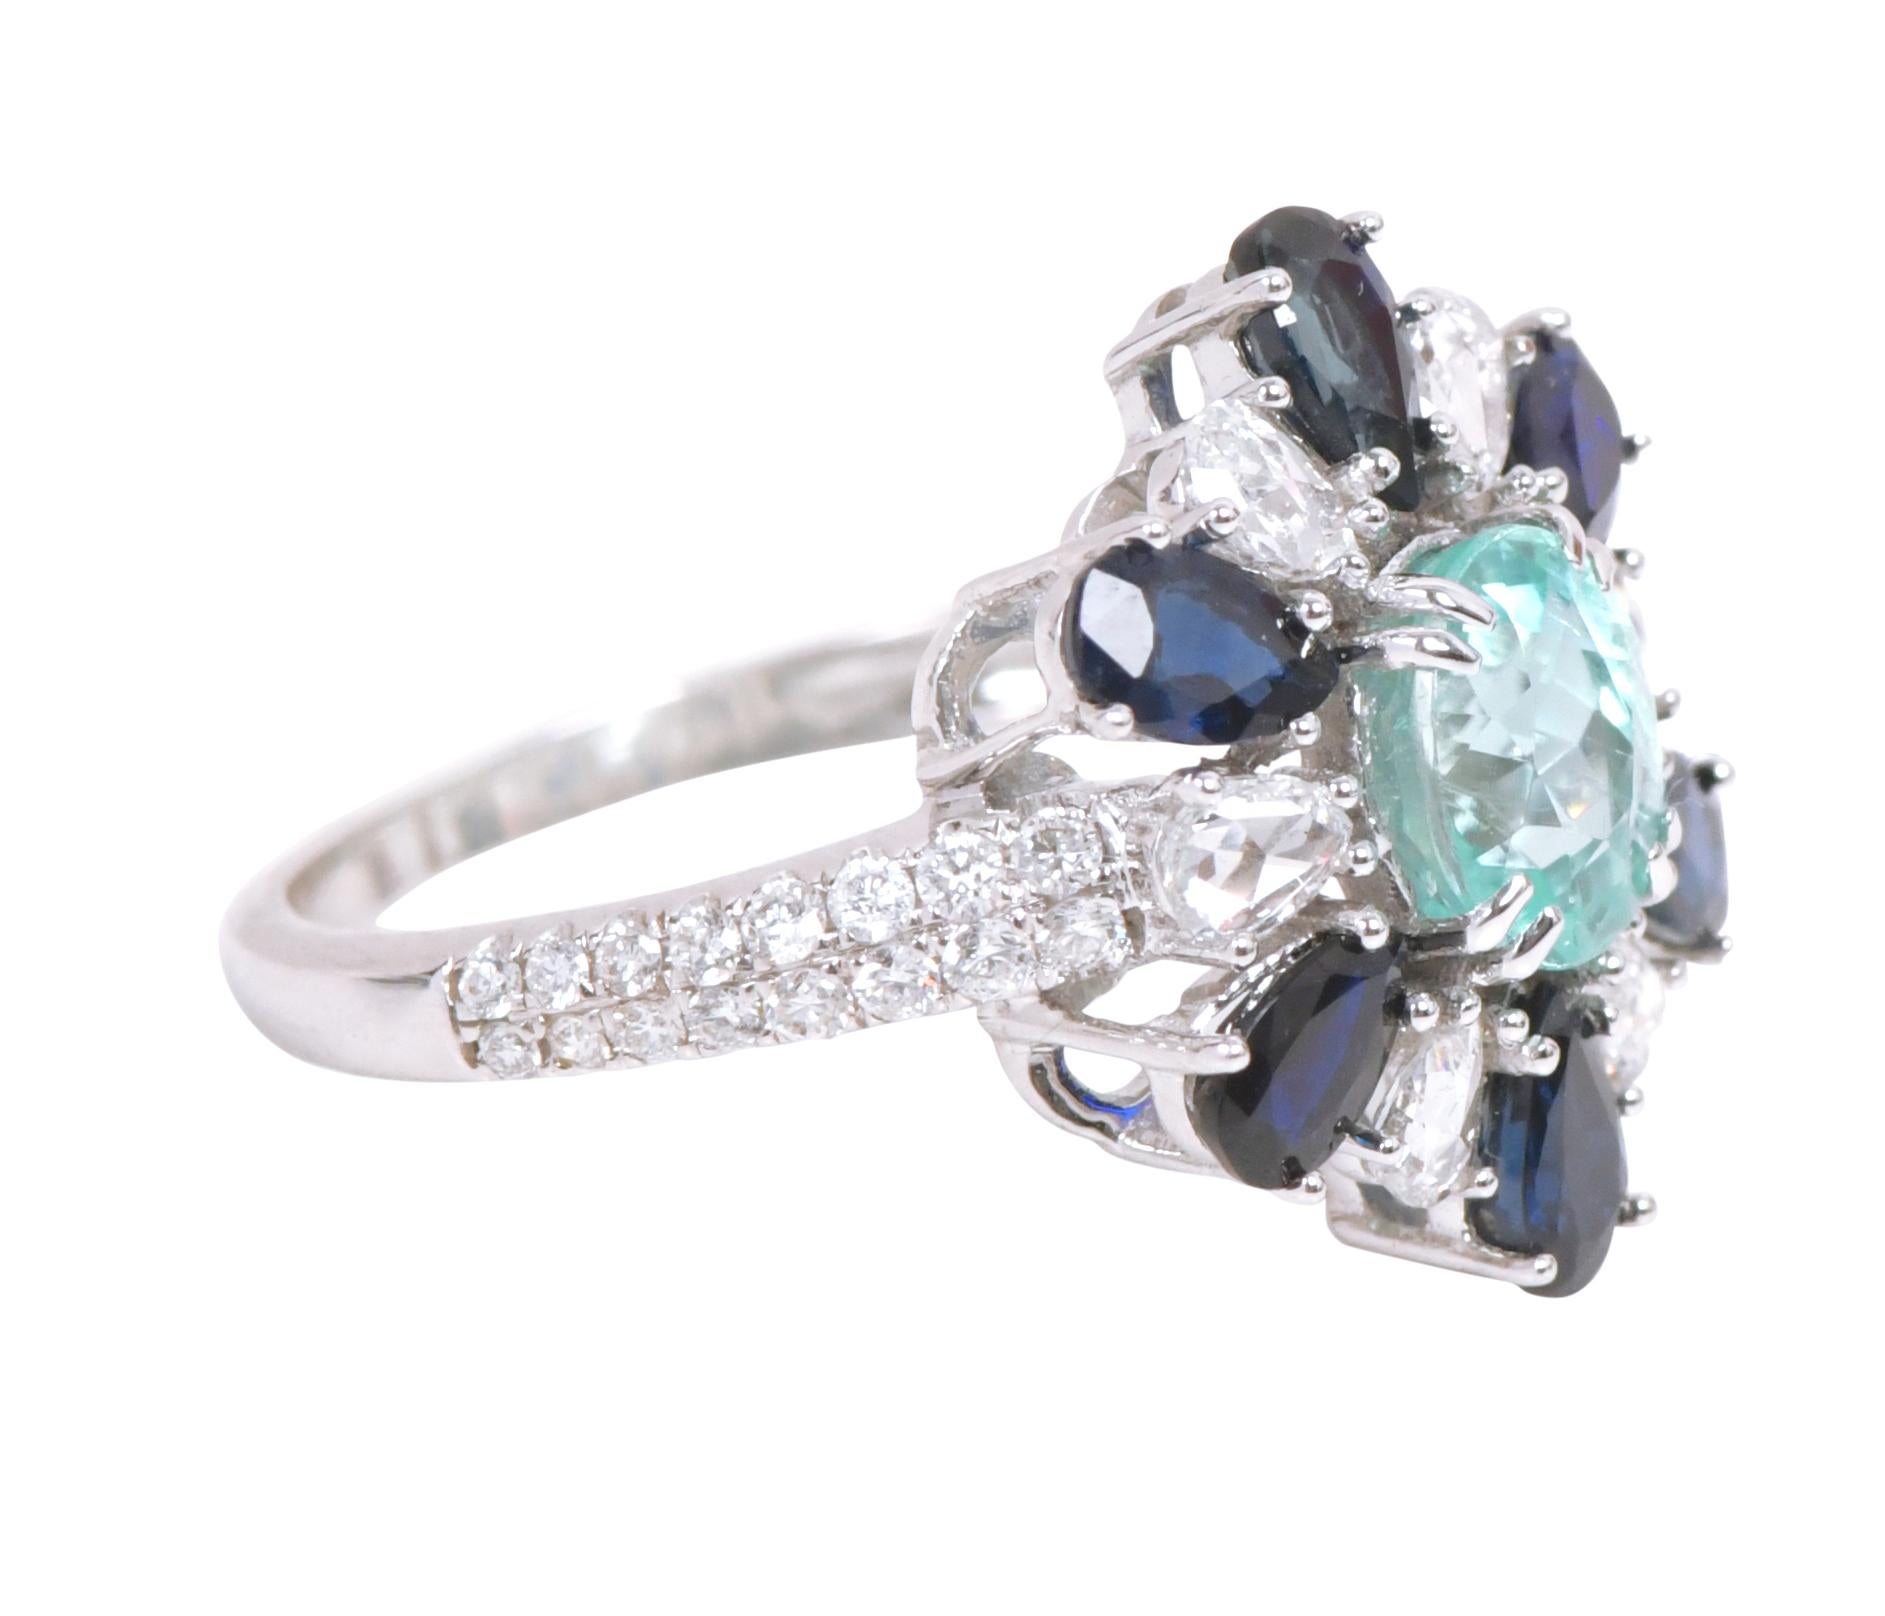 18 Karat Gold 3.91 Carat Paraiba Tourmaline, Sapphire, and Diamond Cocktail Ring

This meticulous rare bluish Paraiba Tourmaline and sapphire and diamond ring is mesmerizing. The leveled-up solitaire oval Paraiba Tourmaline is incredibly set in